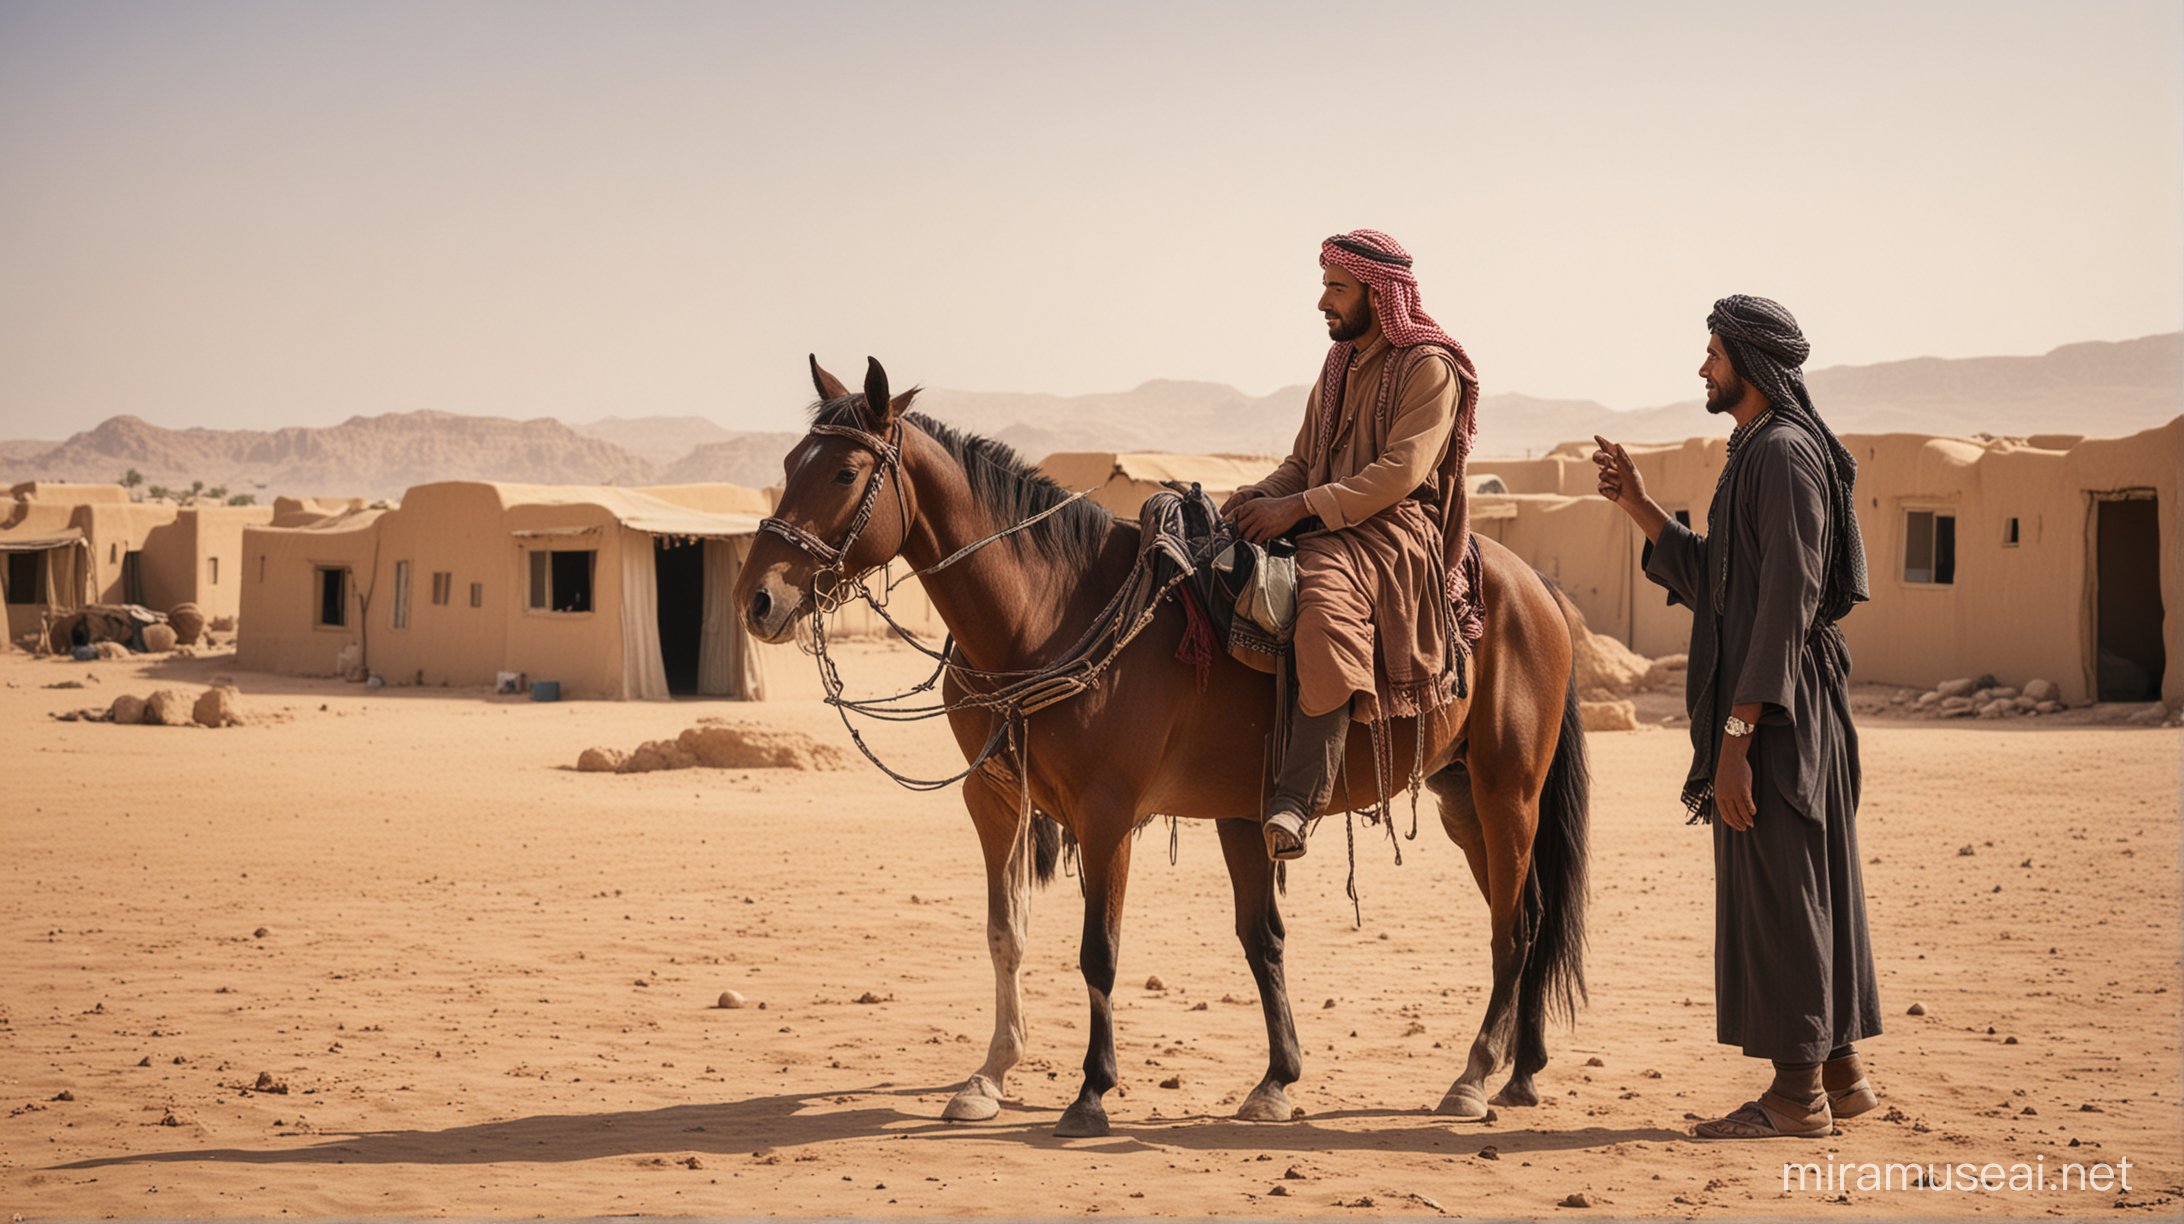 creat an image about A Bedouin and man with a horse near his house